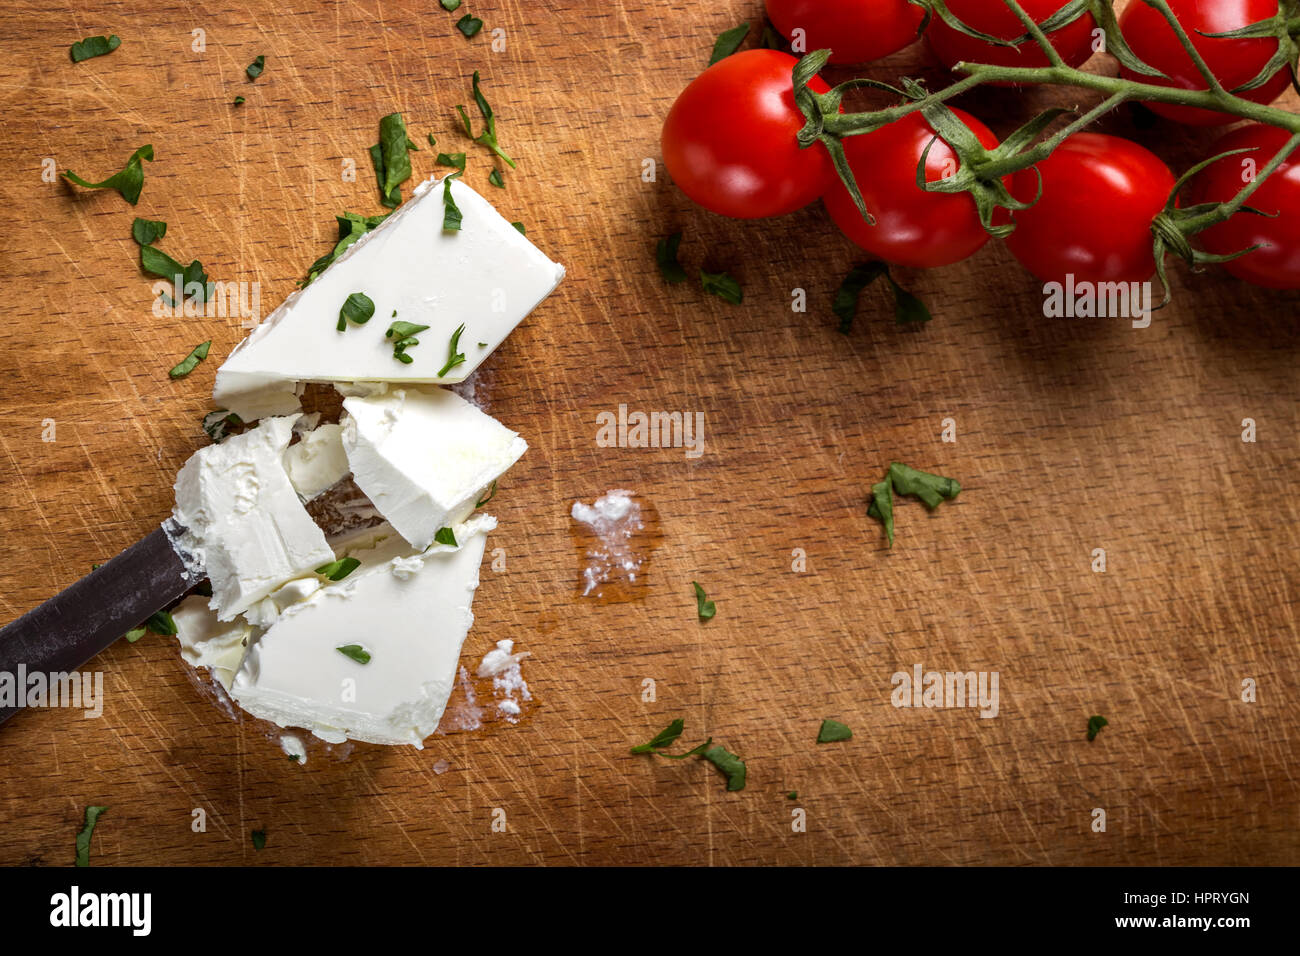 Feta cheese with knife and bunch of cherry tomatoes on wood with herbs Stock Photo